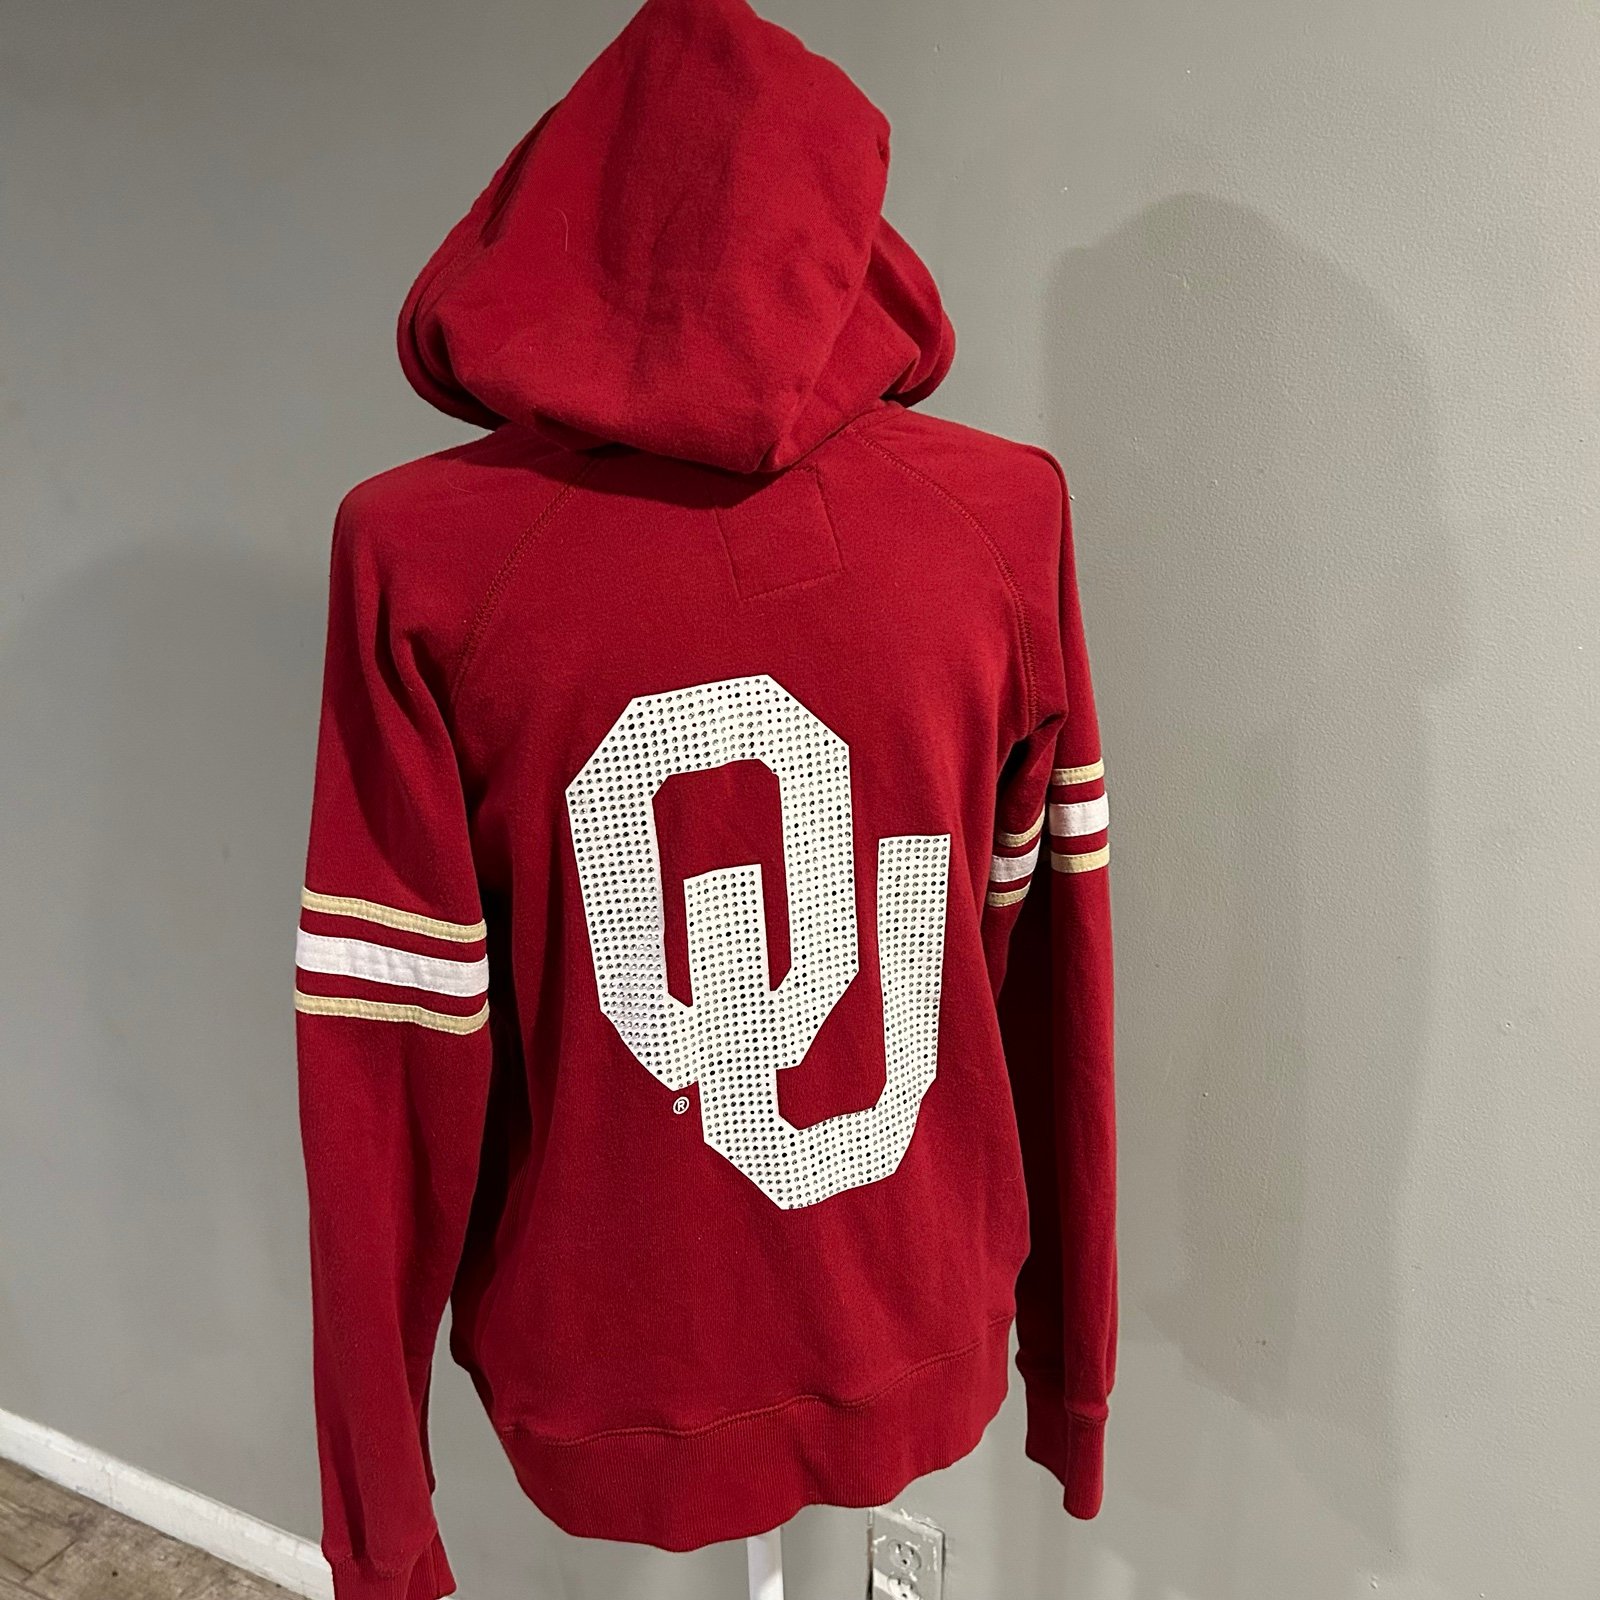 Affordable OU Sooners Vintage Y2K Sequin Hoodie Women’s XL University of Oklahoma gxMYVD9t2 for sale